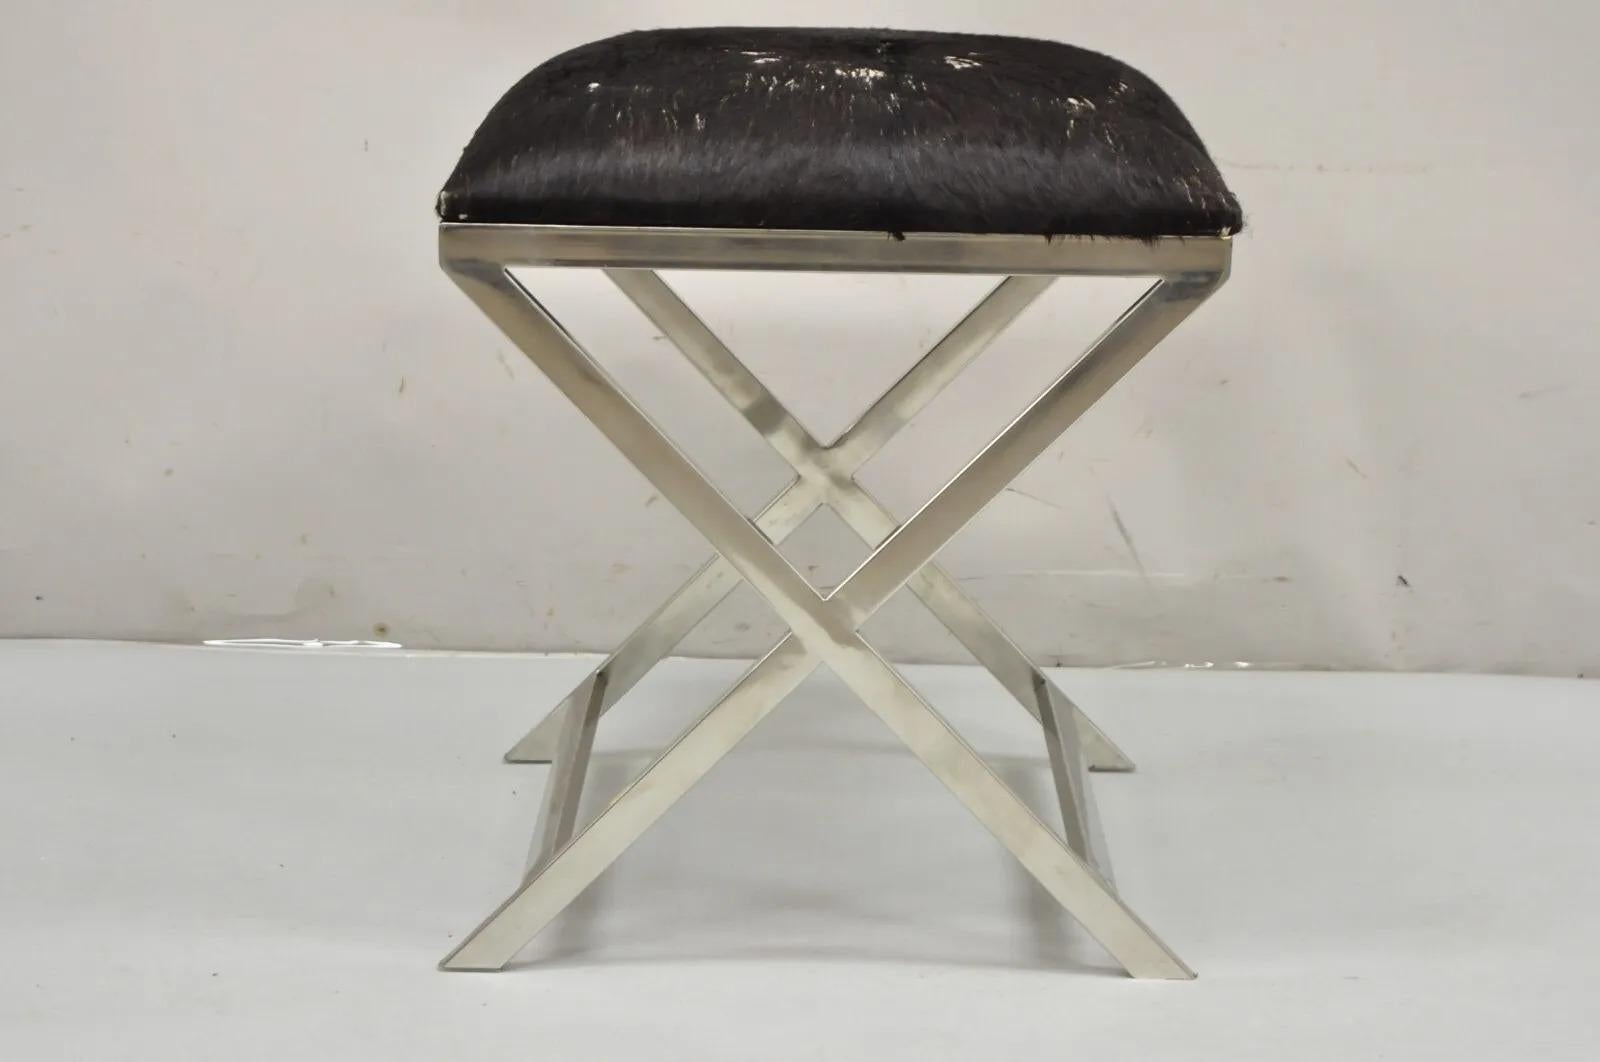 Modern Chrome Frame X-Frame Metal Stool with Cowhide Upholstery. Item features cowhide upholstery (with damage), metal chrome x-frame, clean modernist lines, great style and form. Circa Late 20th Century - 21st Century. Measurements: 21